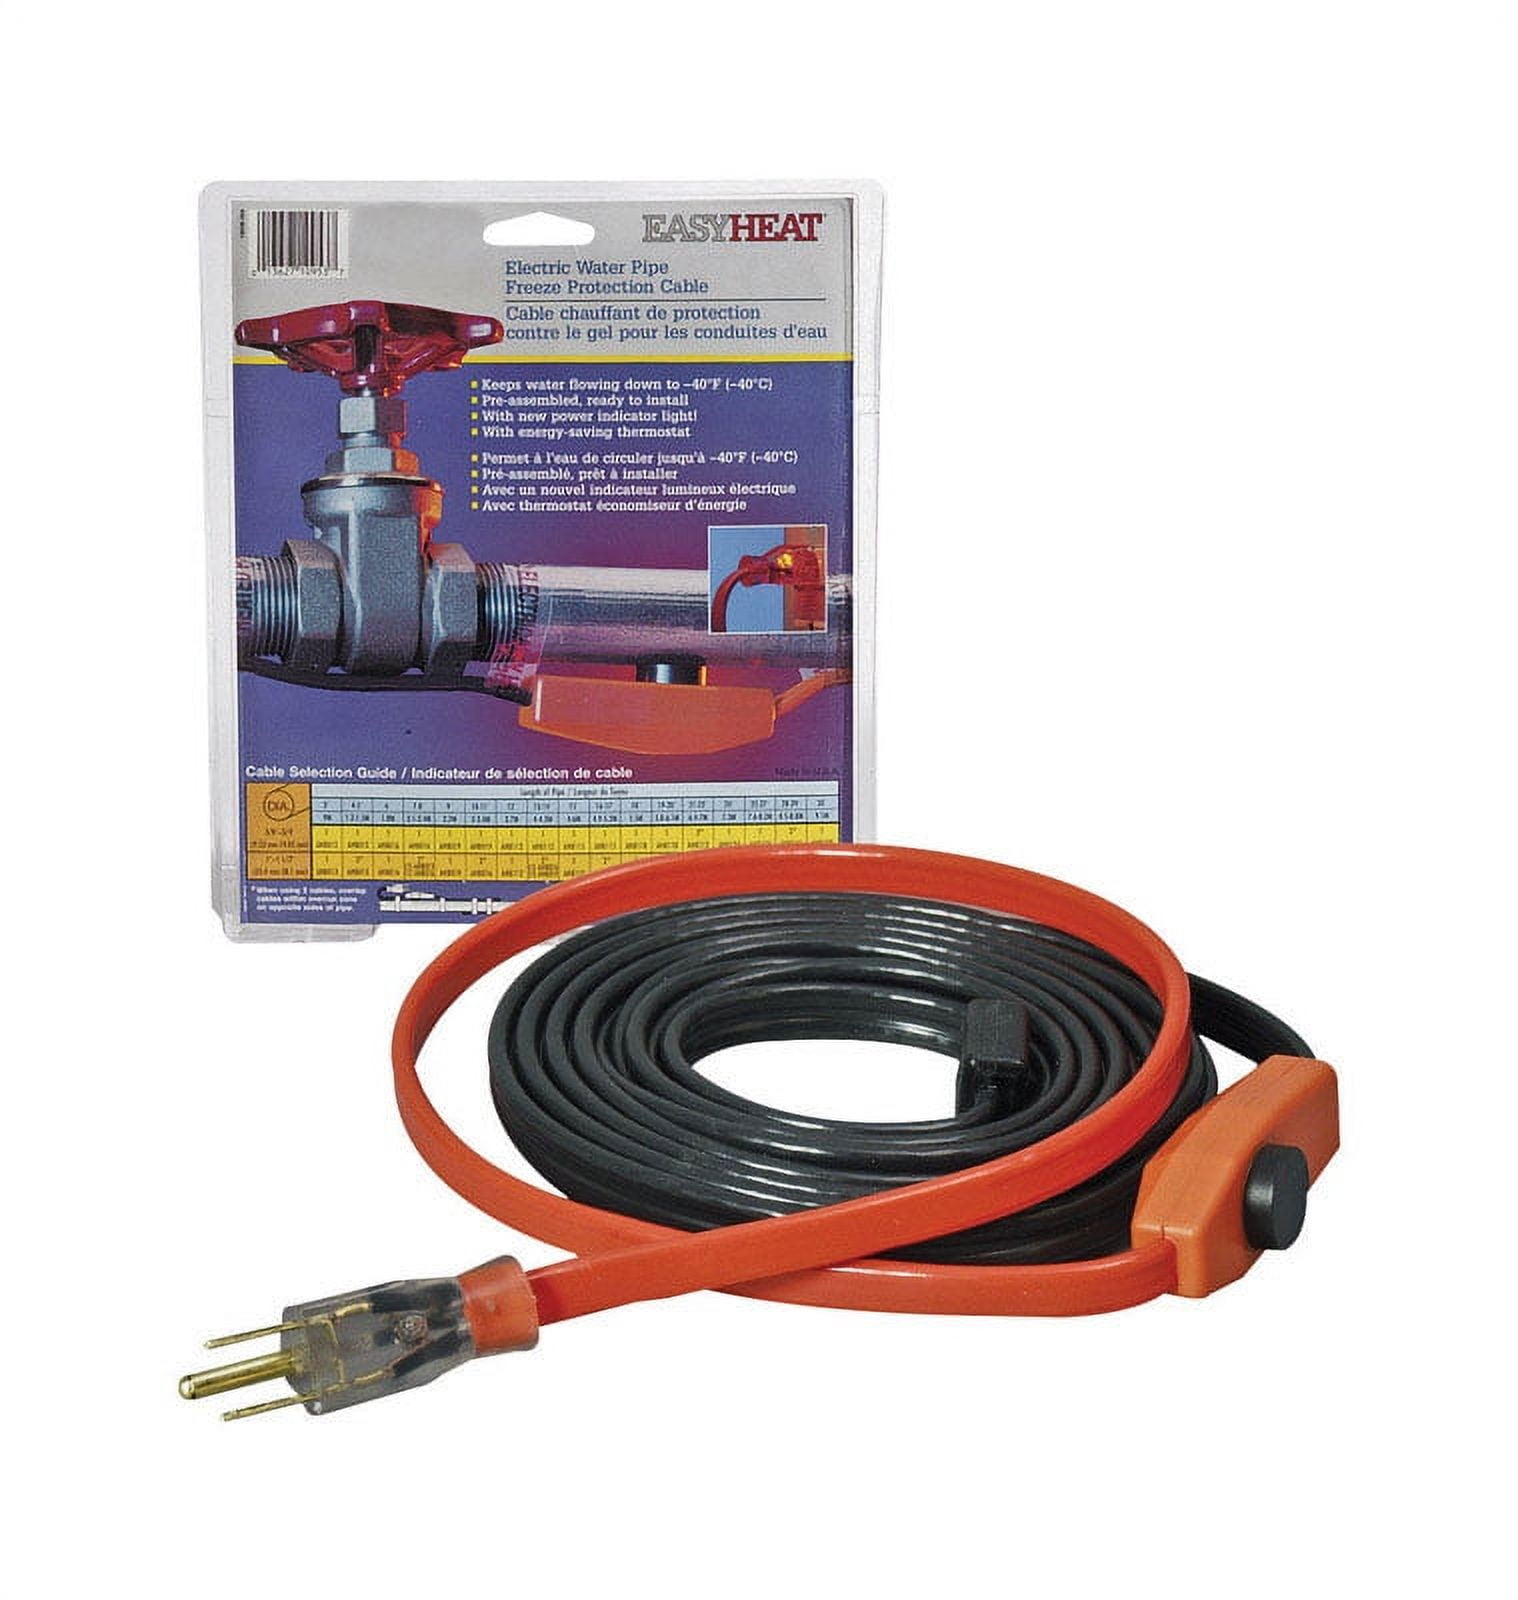 Easy Heat 9' Pipe Heating Cable